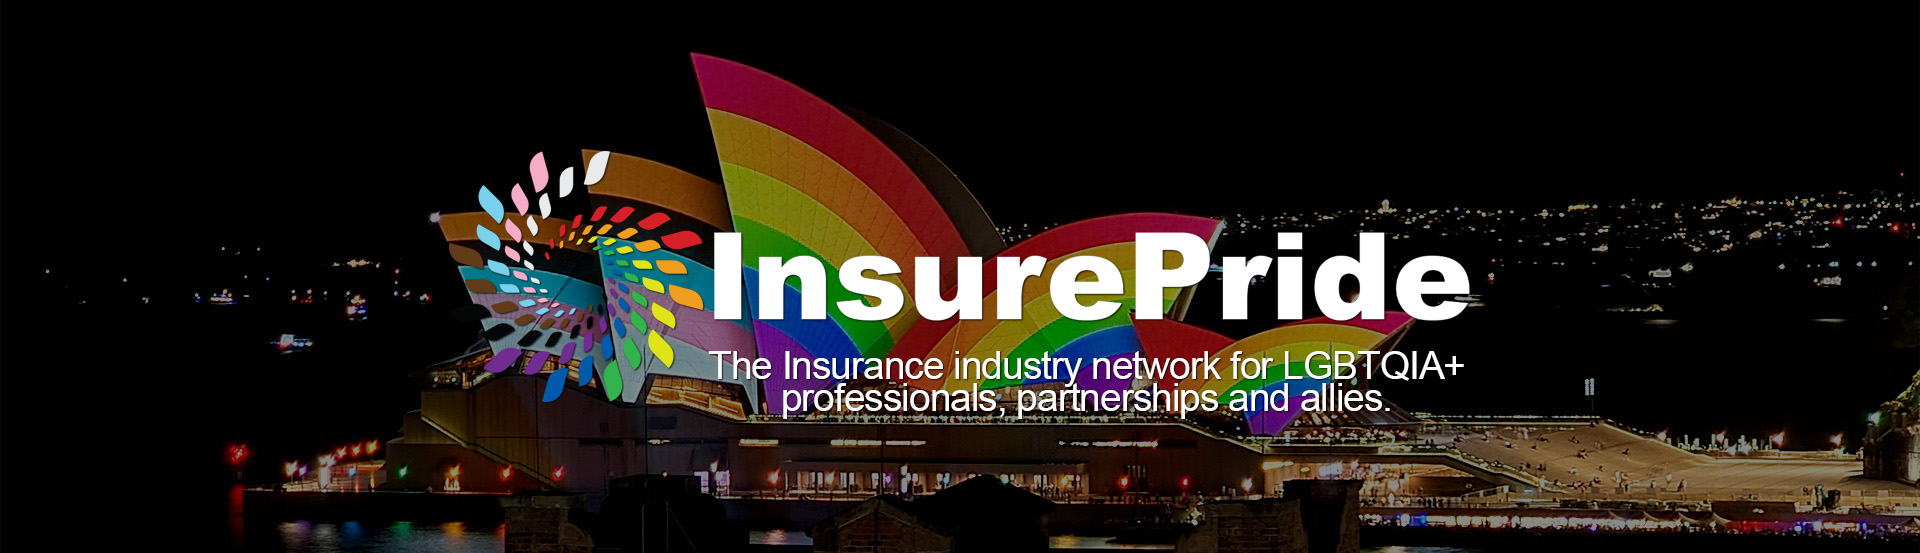 Header image of page, Progress Pride flag projected onto the Sydney Opera House. Forefront features InsurePride Logo and text of "The Insurance industry network for LGBTQIA+ professionals, partnerships and allies."